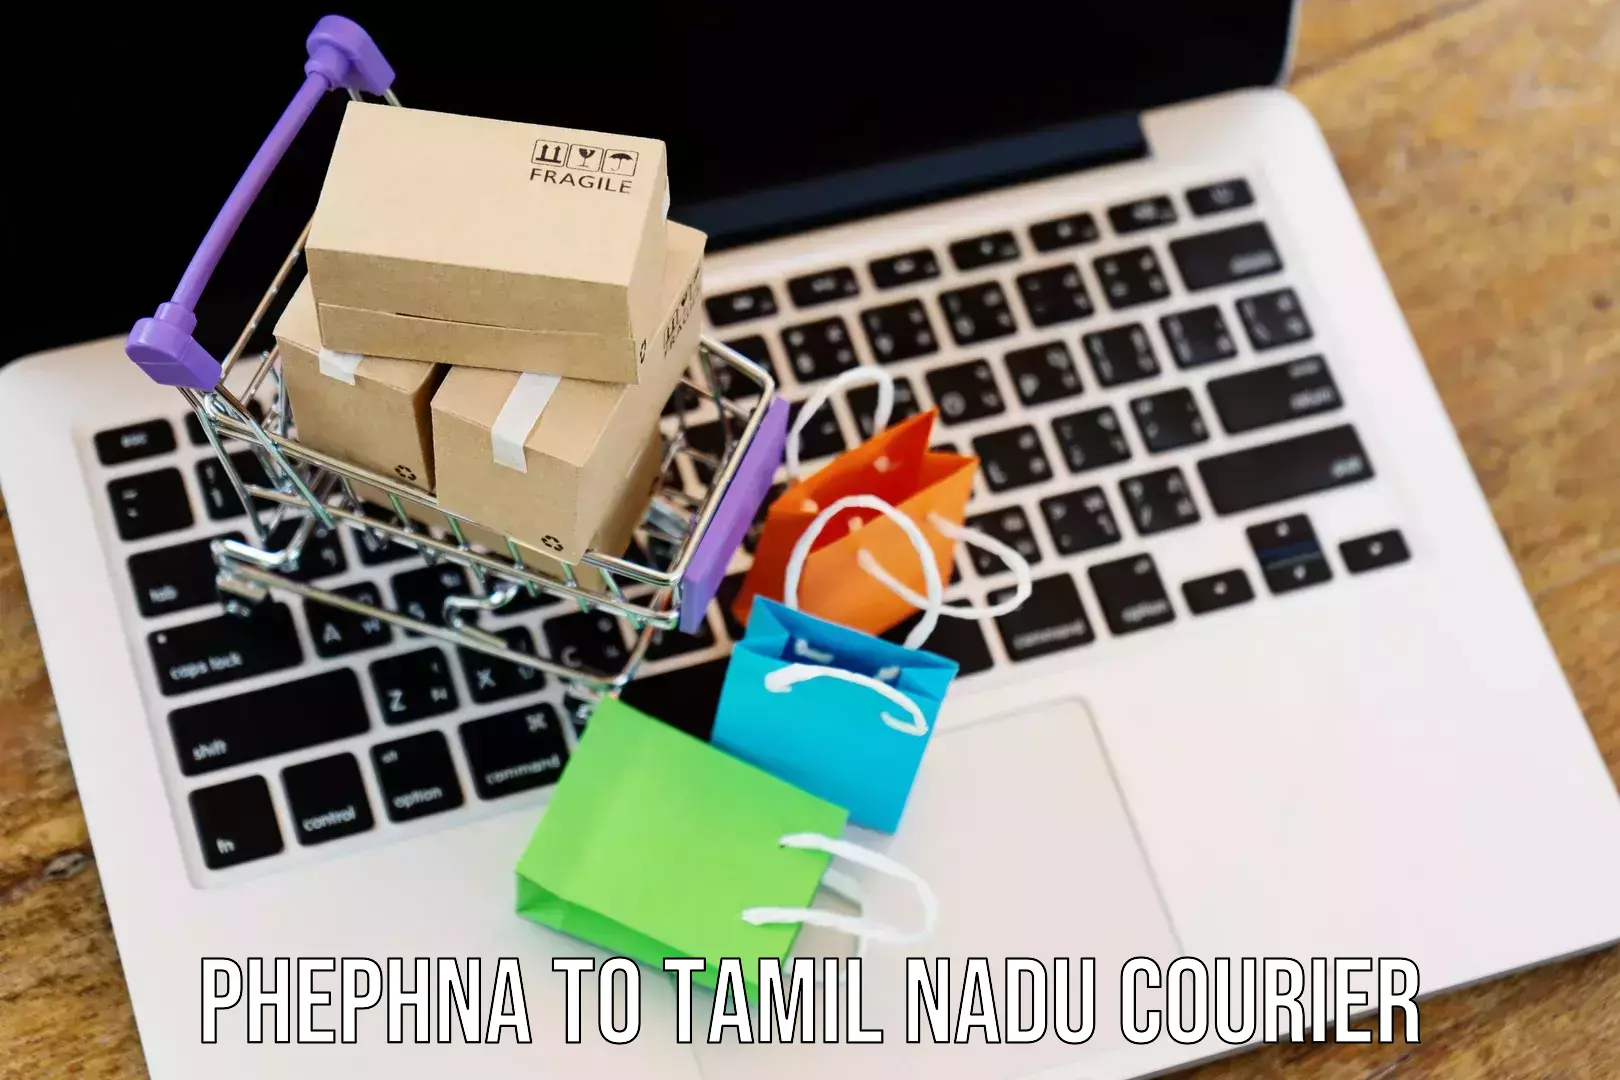 Courier services Phephna to Ennore Port Chennai